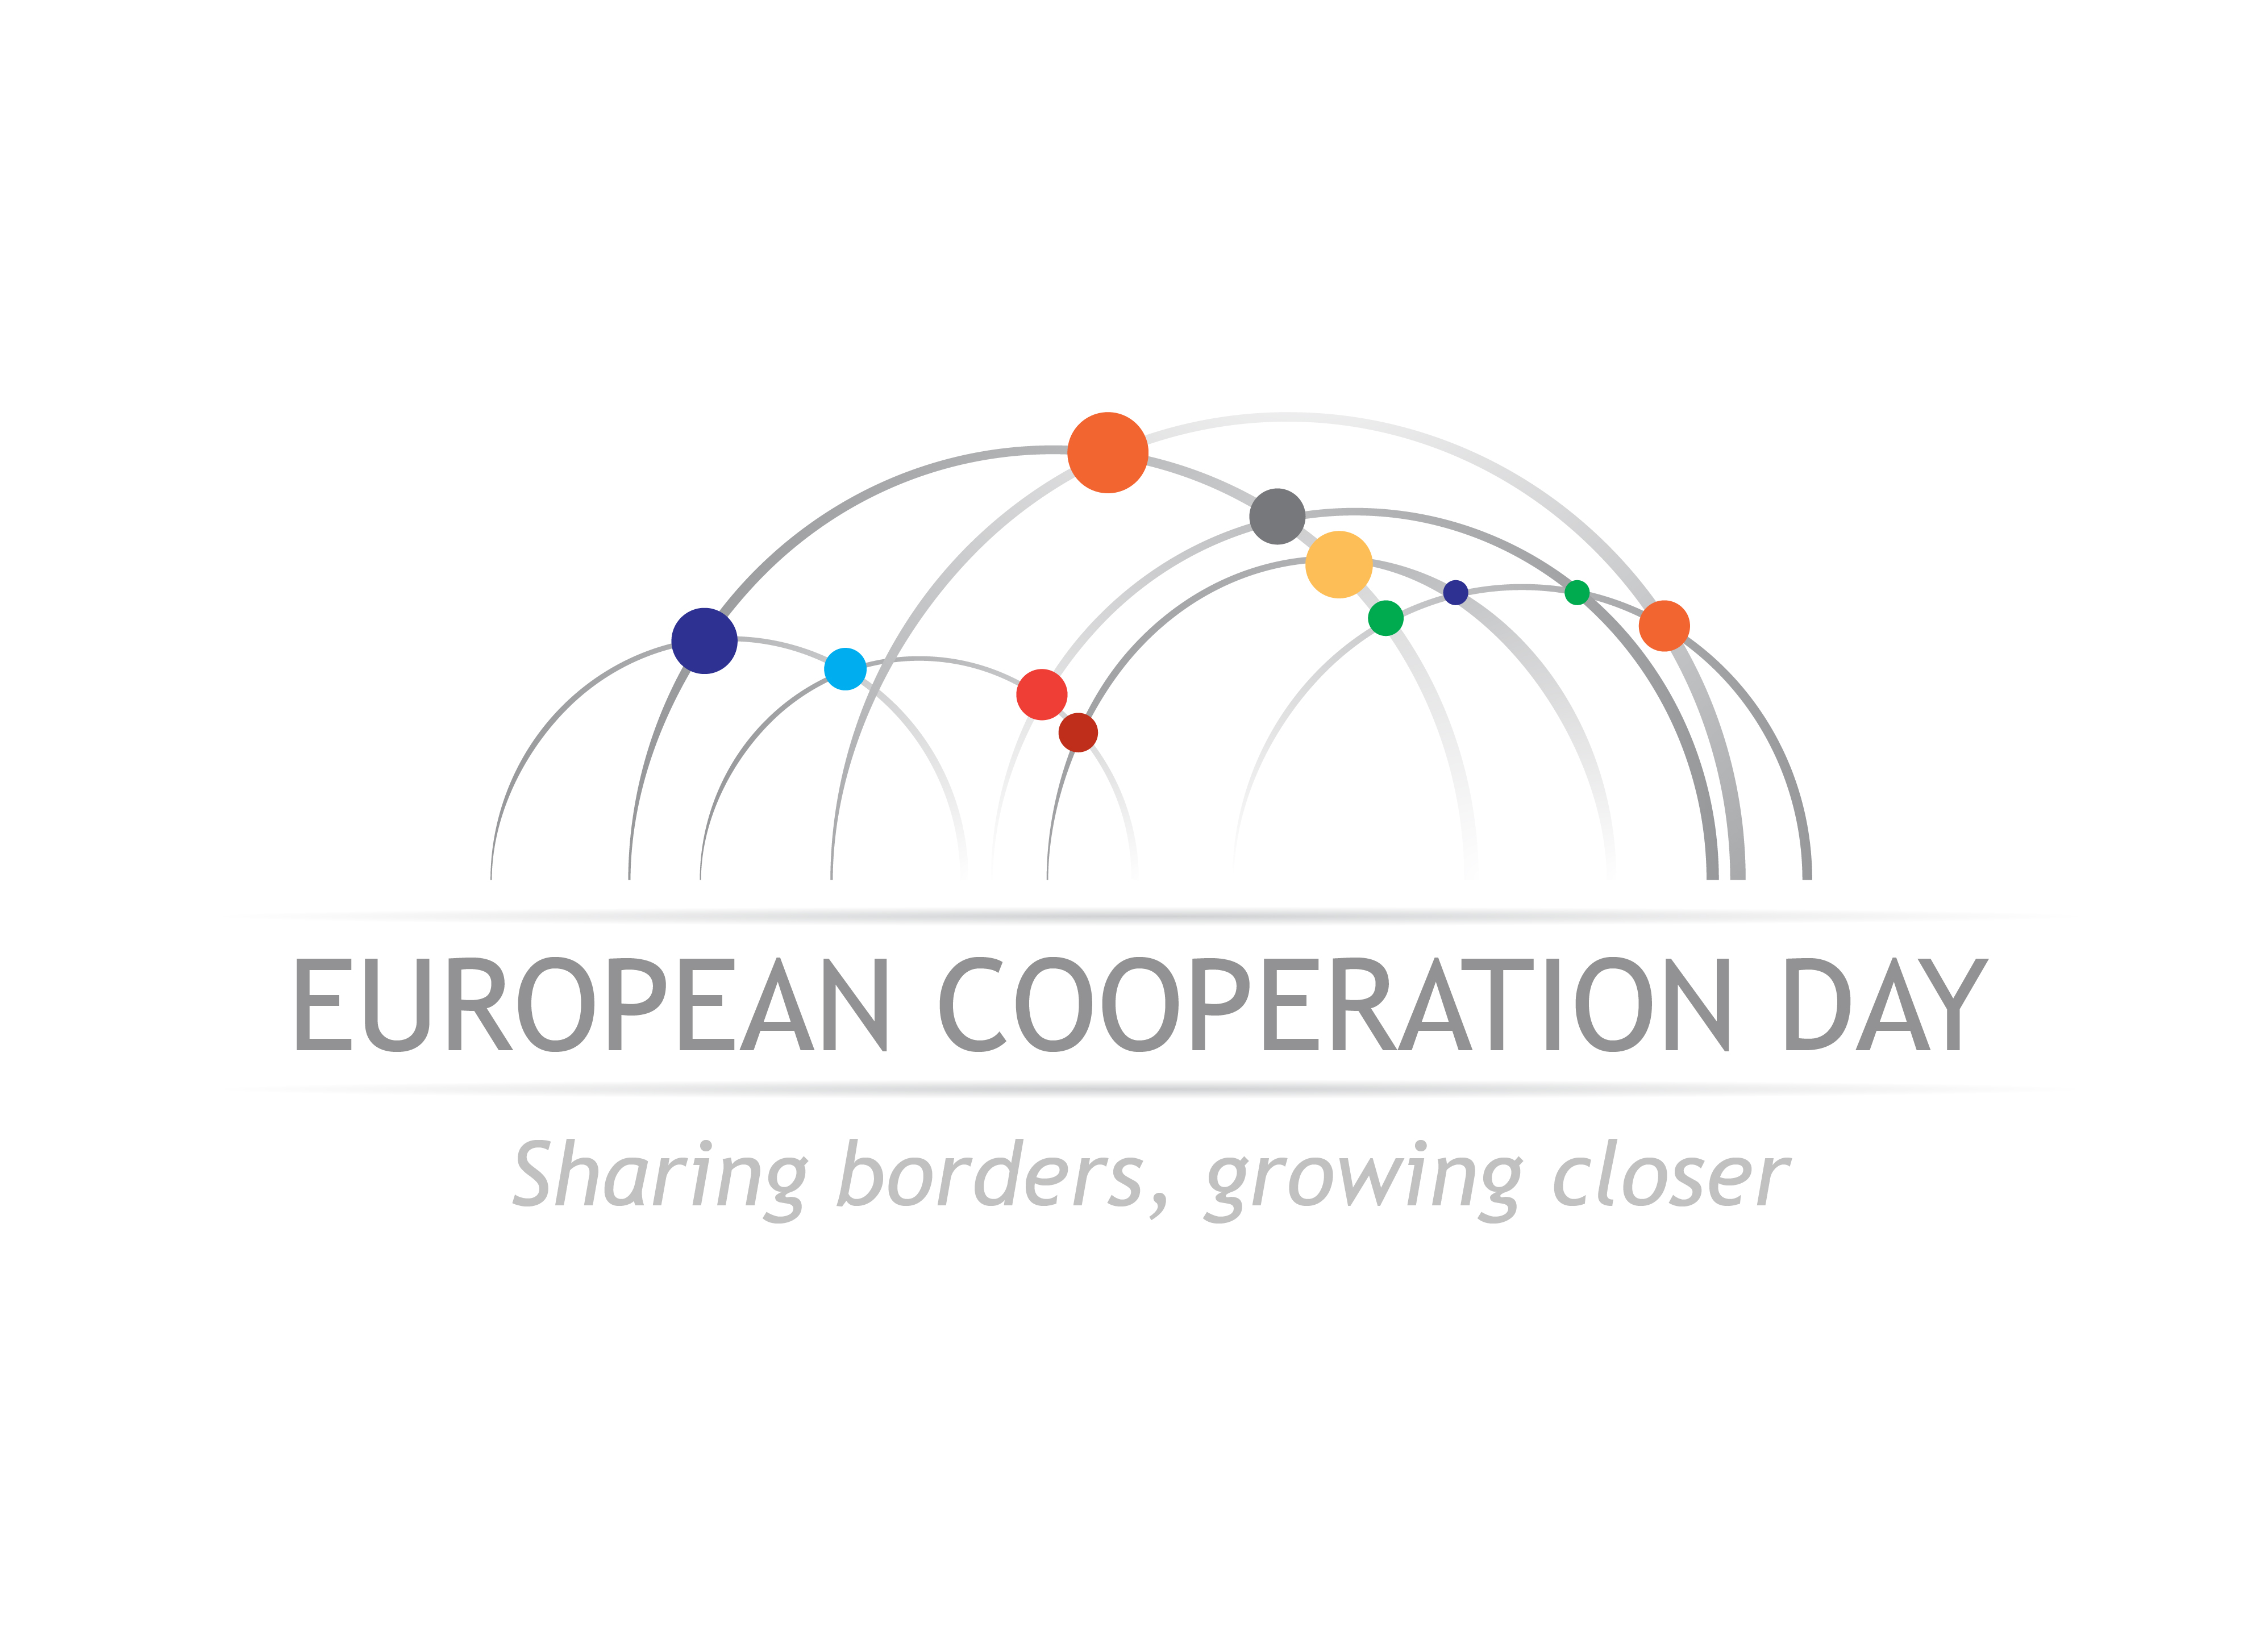 COCOON at the European Cooperation Day